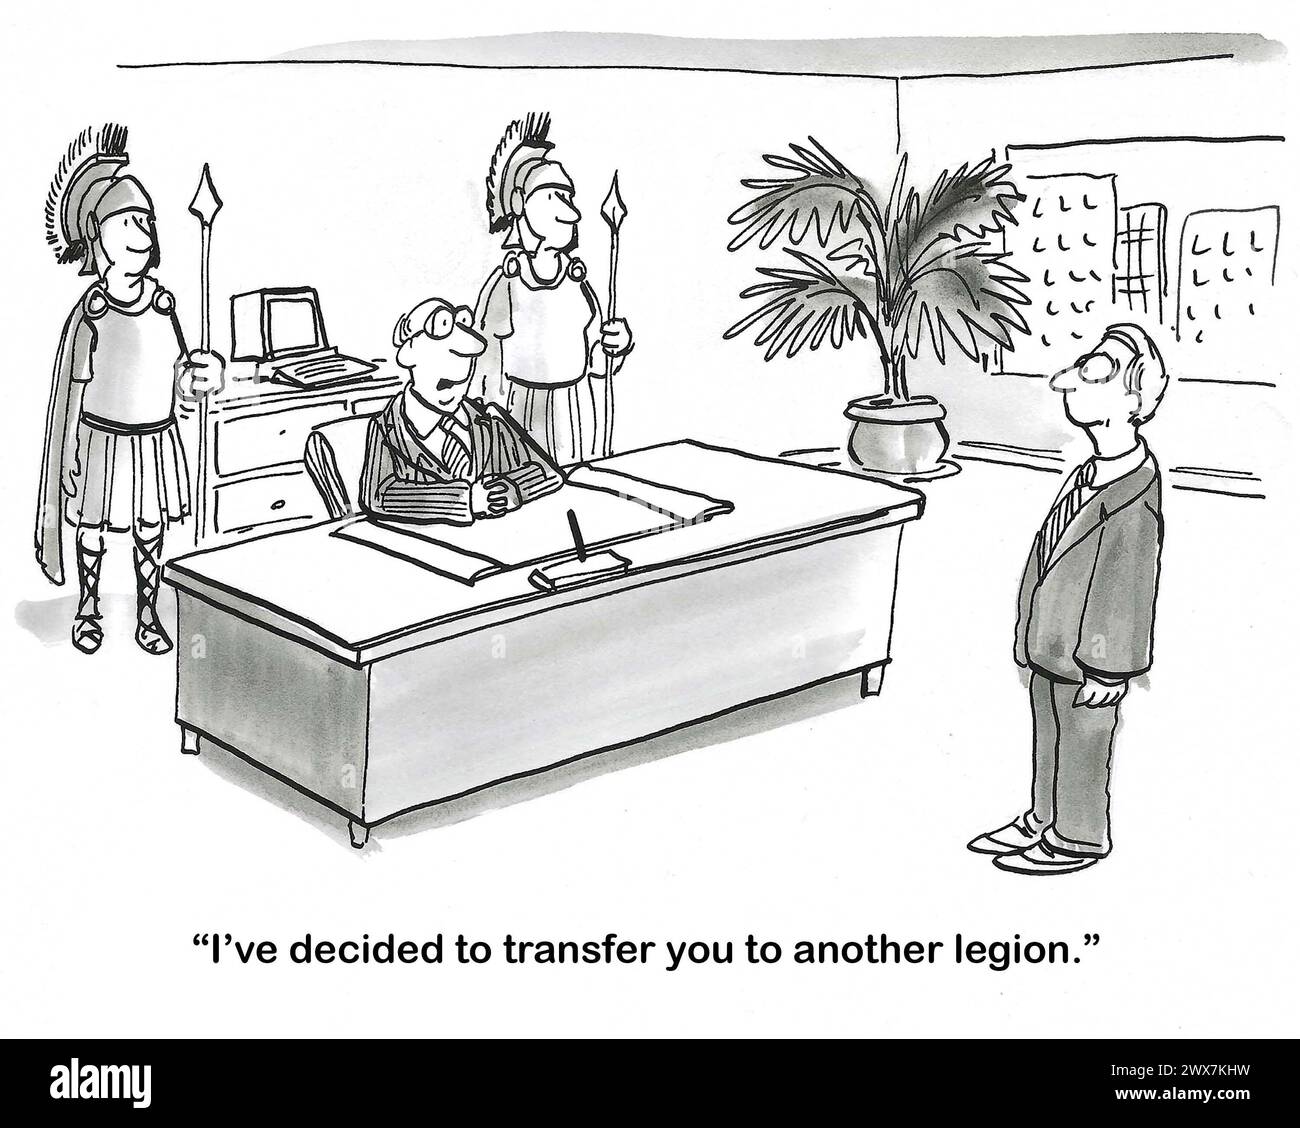 BW cartoon of a company made up of legions, the manager is being transferred to a new legion. Stock Photo